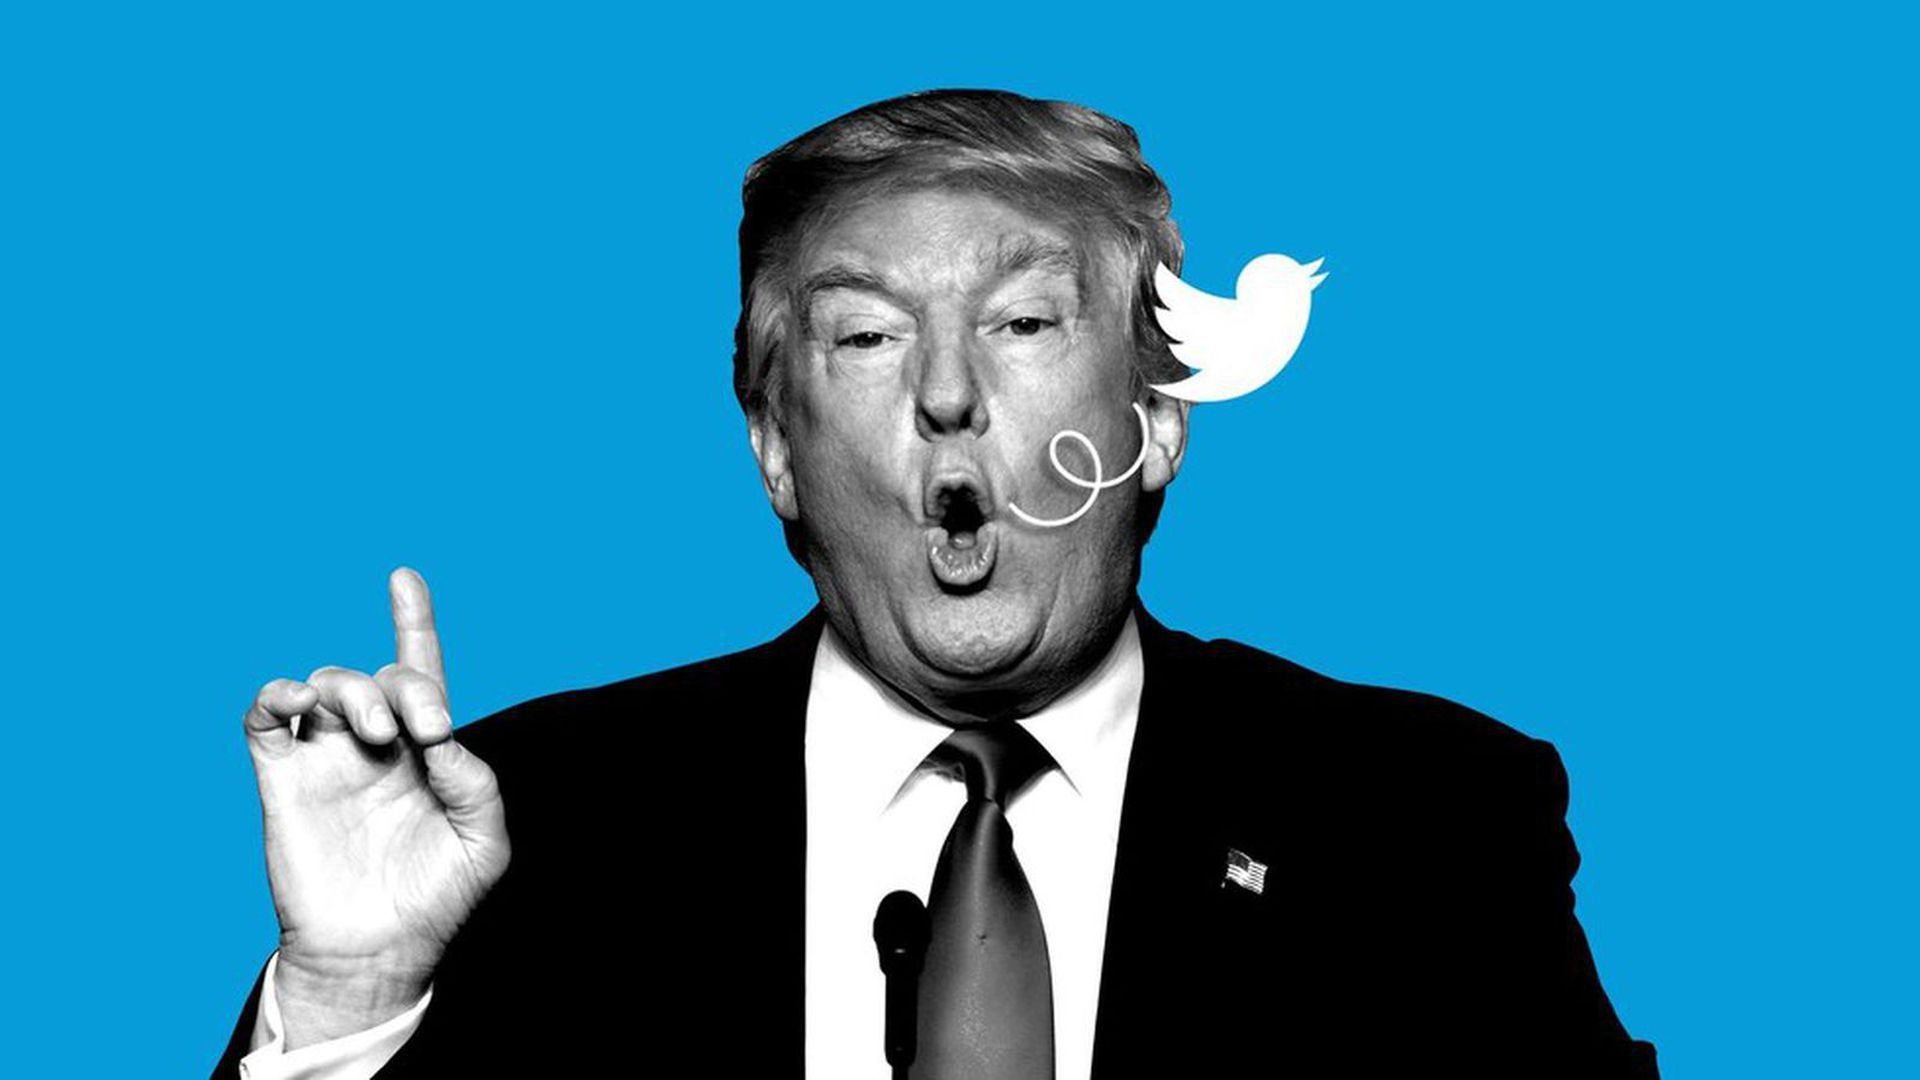 Illustration of President Trump with a Twitter bird flying out of his mouth